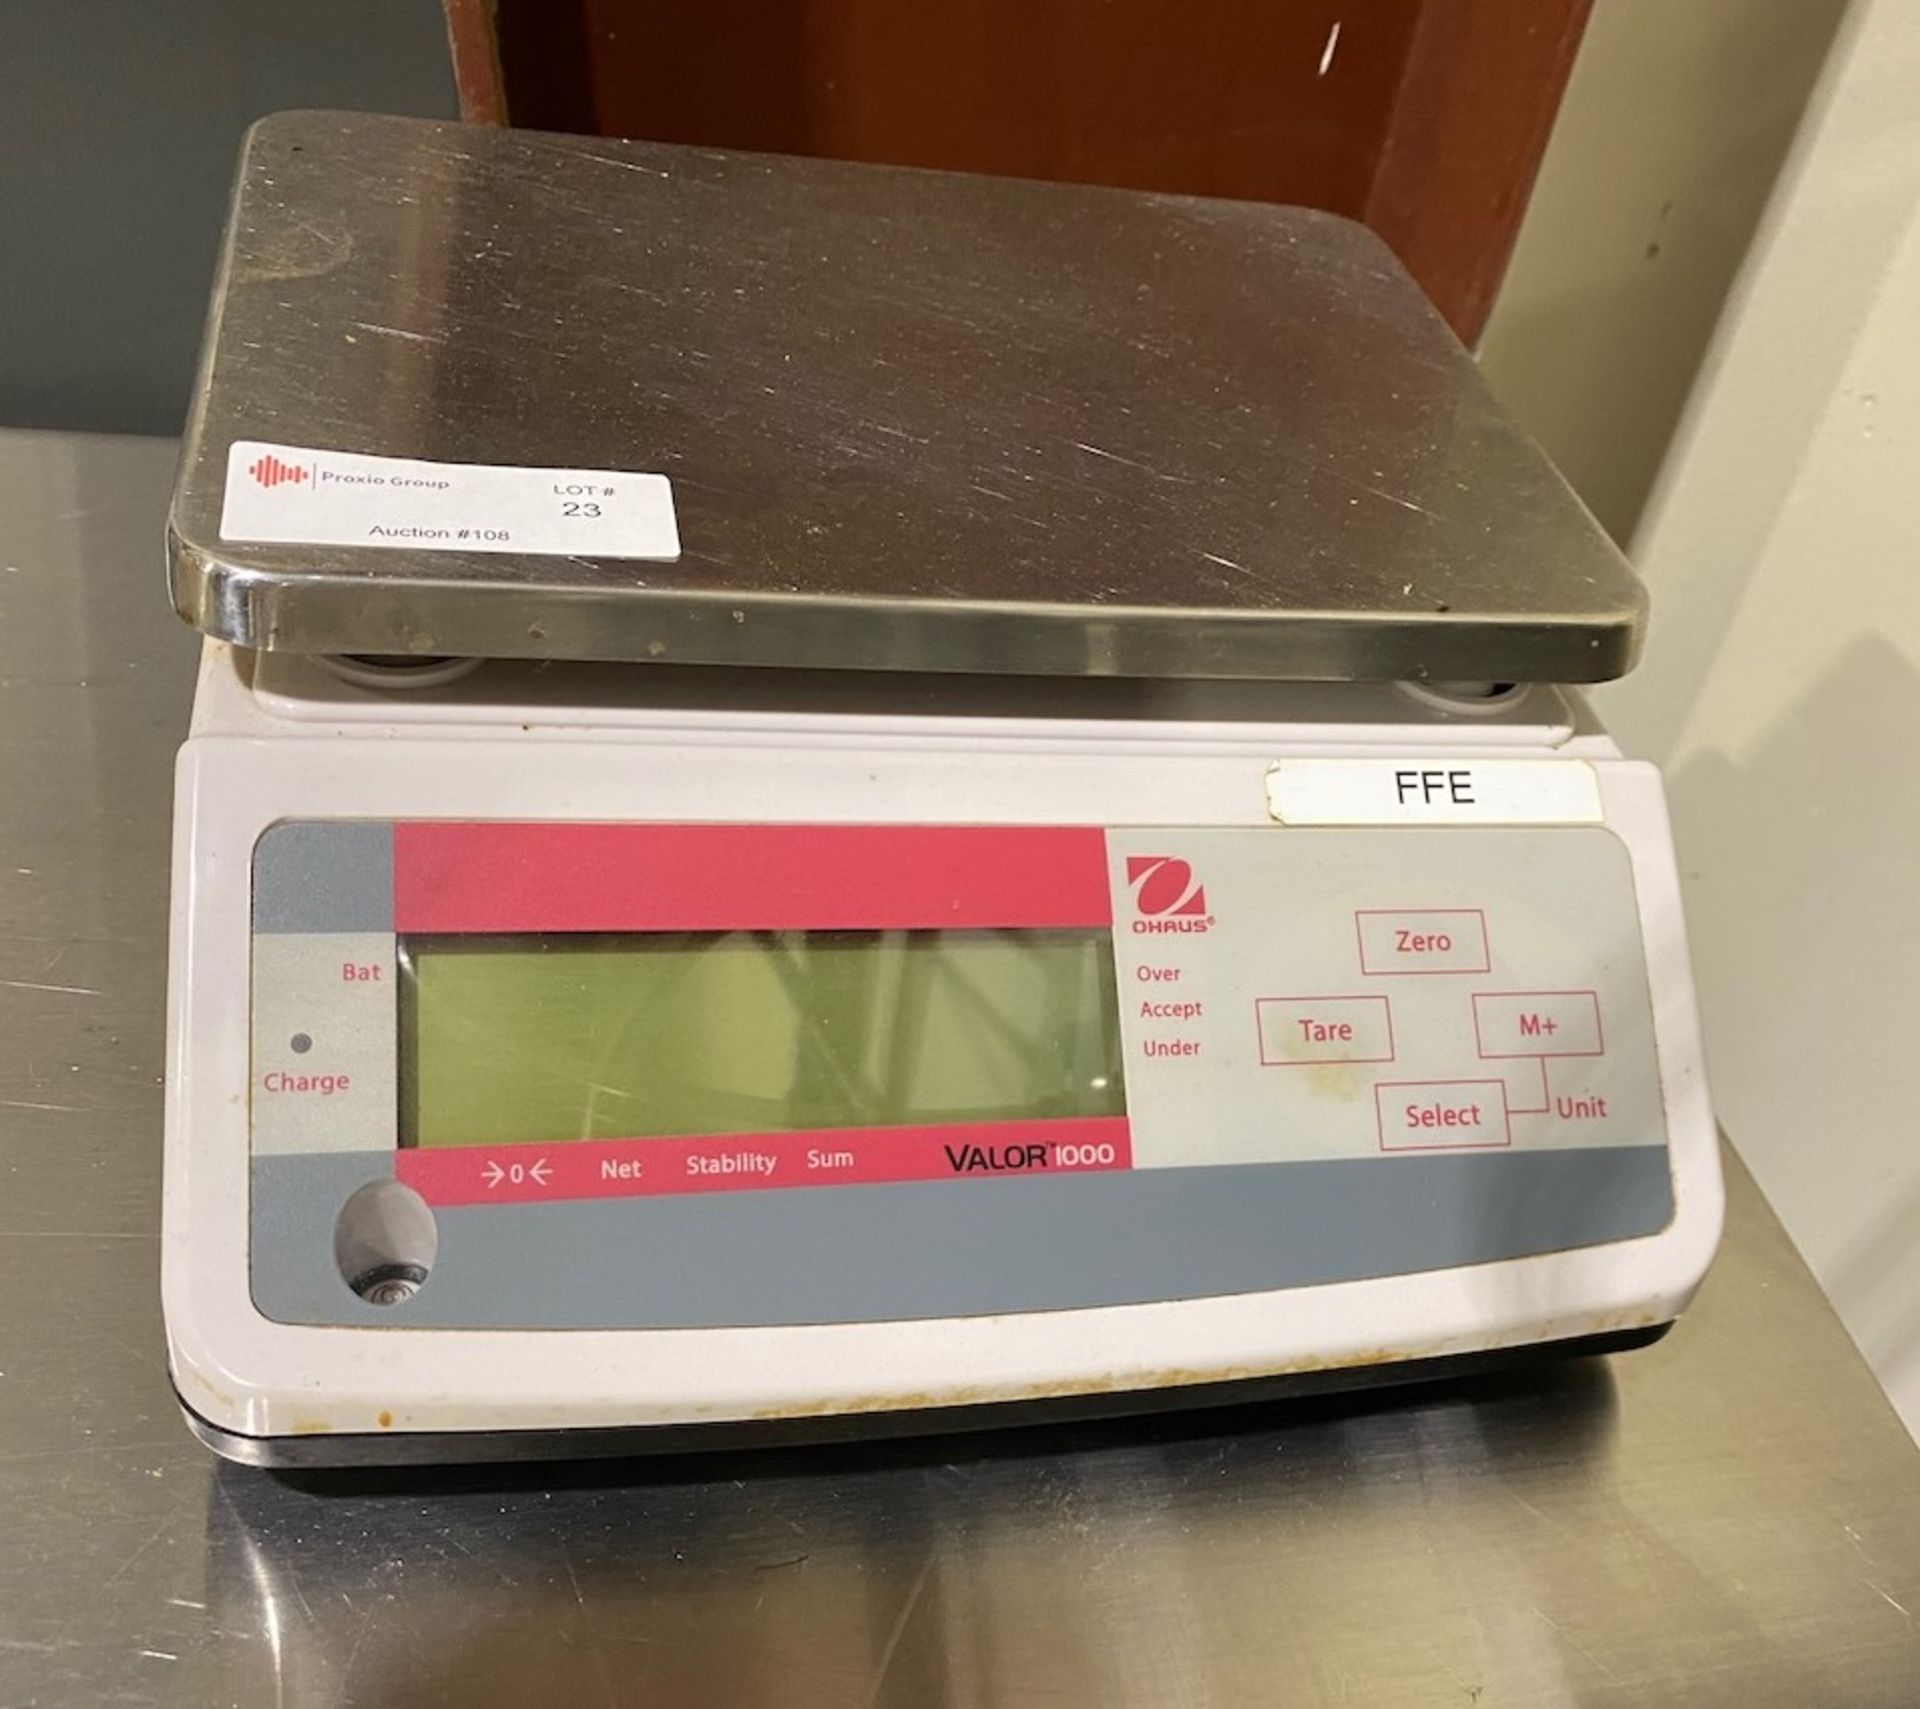 Lab Scale